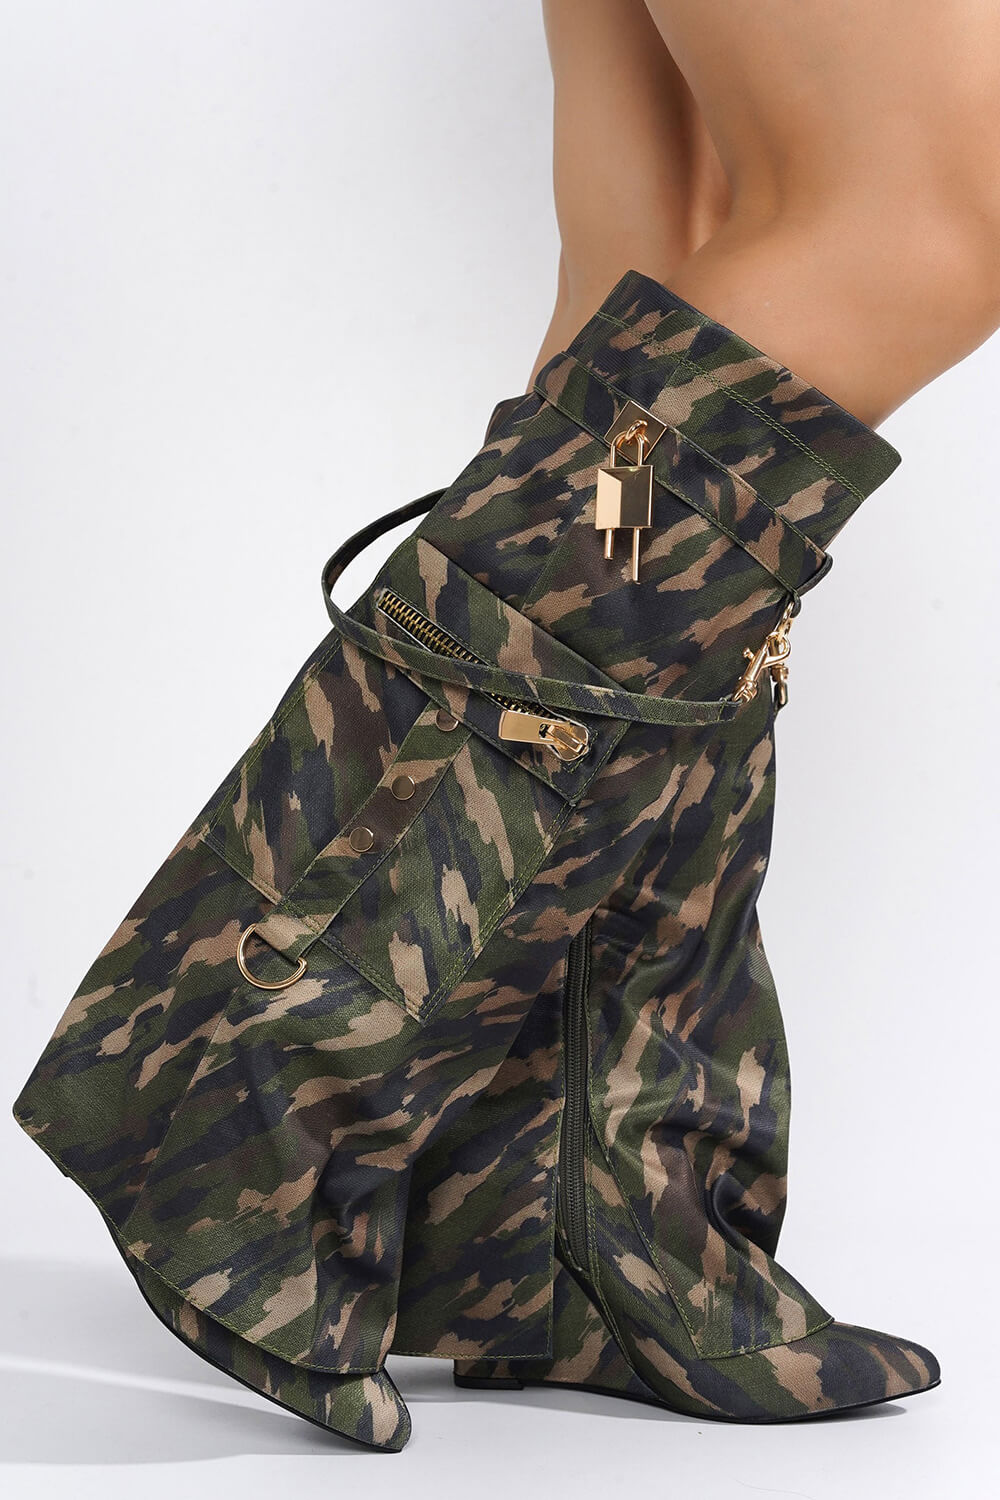 Padlock Pocket Detail Fold Over Pointed Toe Wedge Heel Knee High Long Boots - Camo